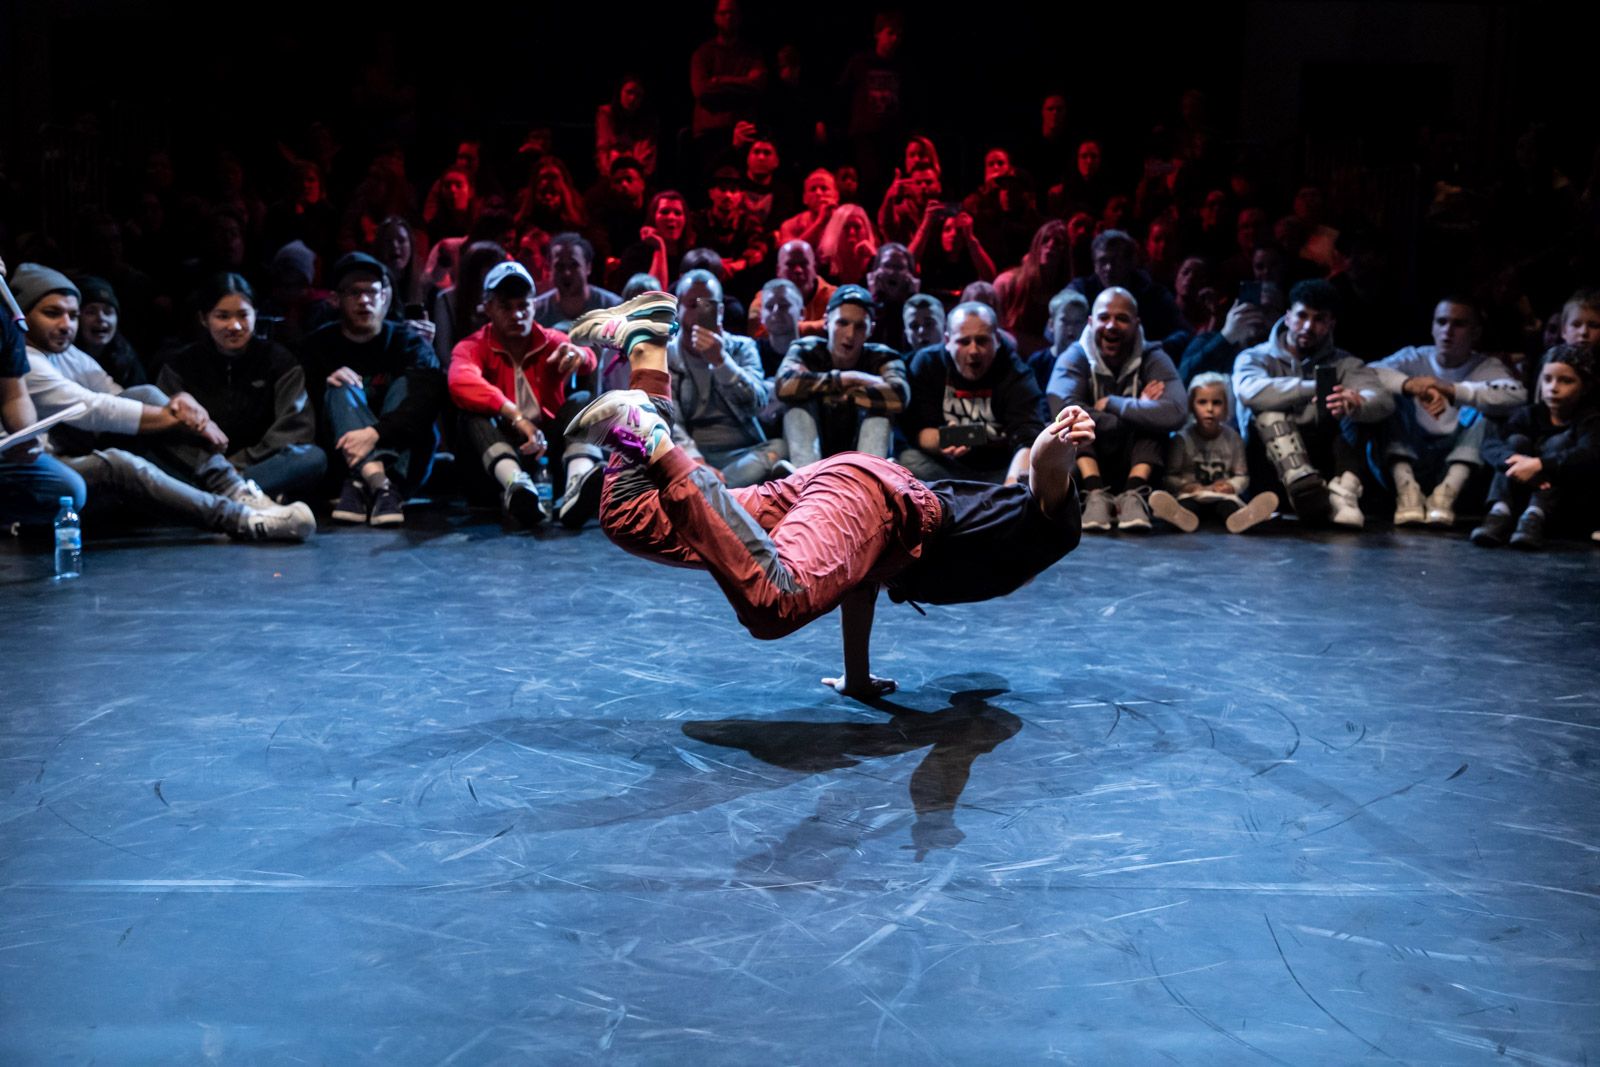 You can see a person breakdancing and leaning on one arm off the ground. An audience sits in front of the person and watches them.